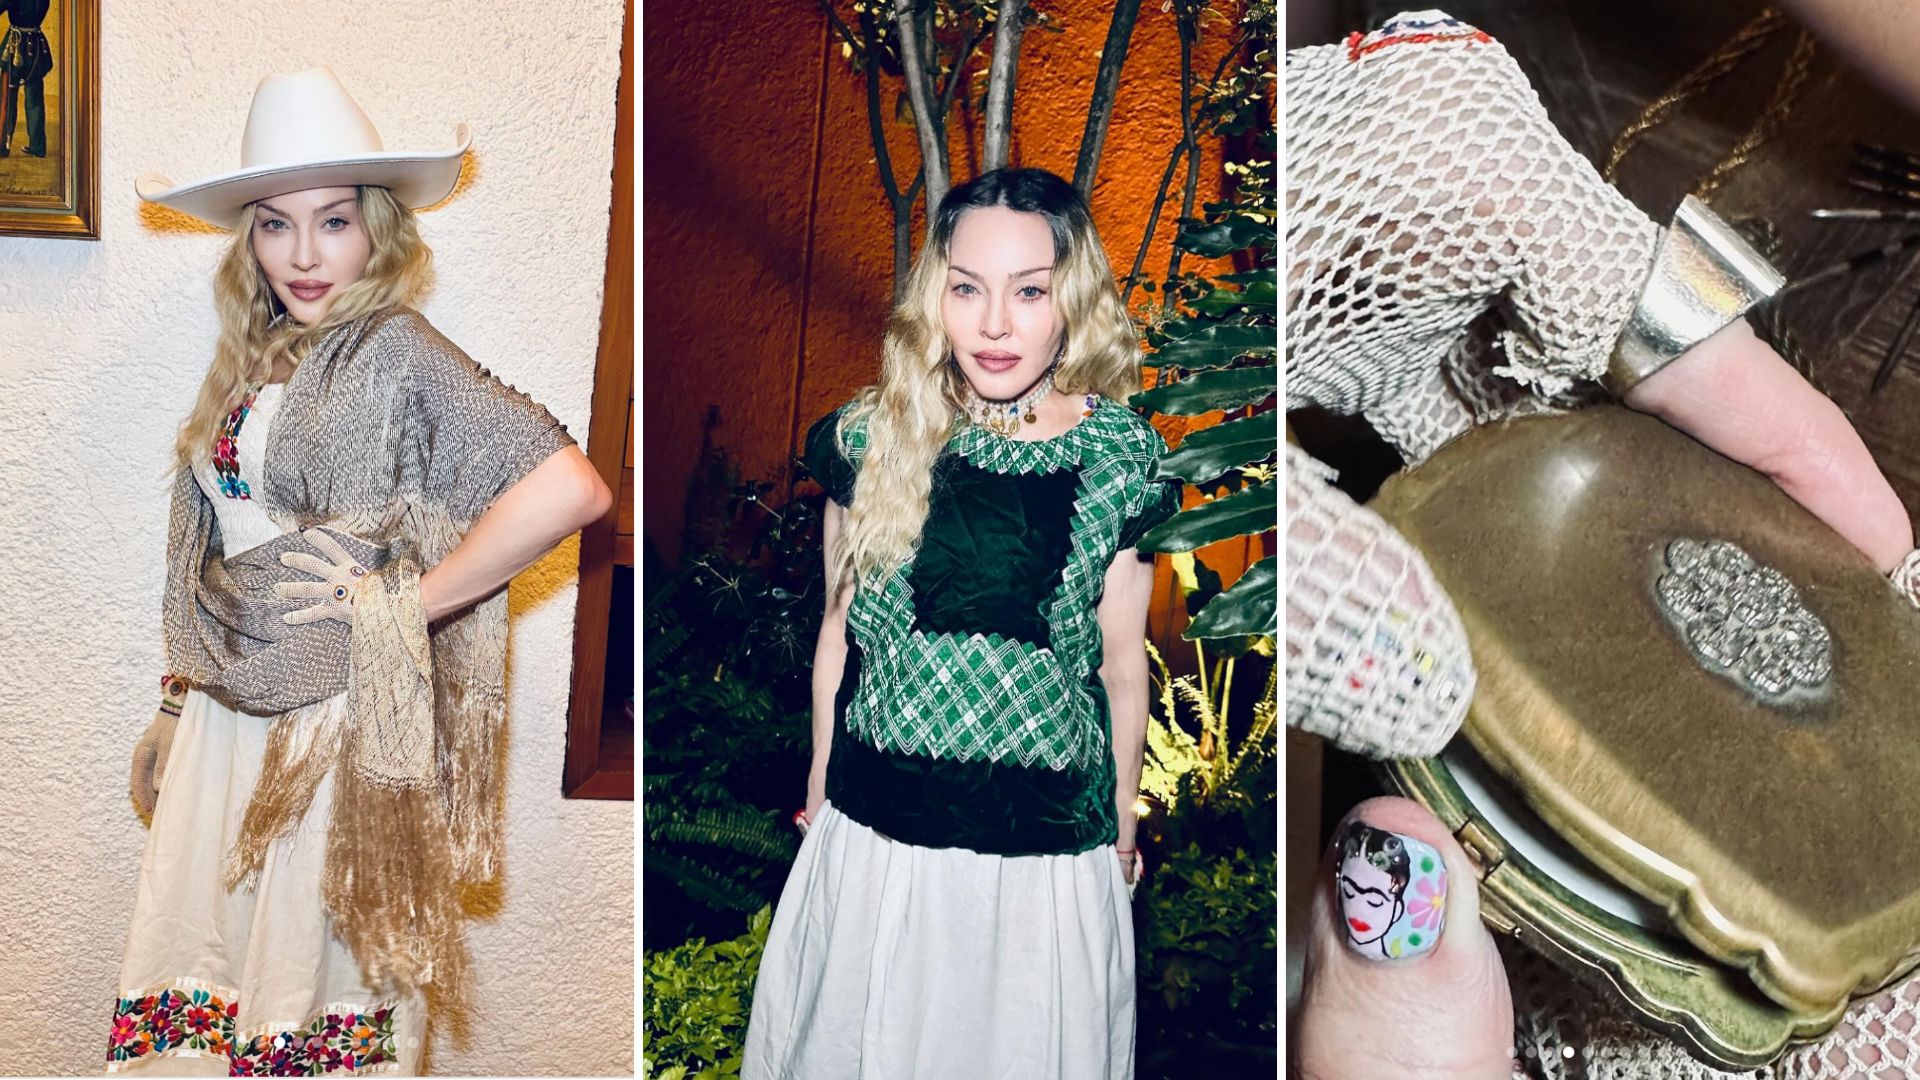 Madonna just paid tribute to her ‘eternal muse’ Frida Kahlo by trying on her clothes